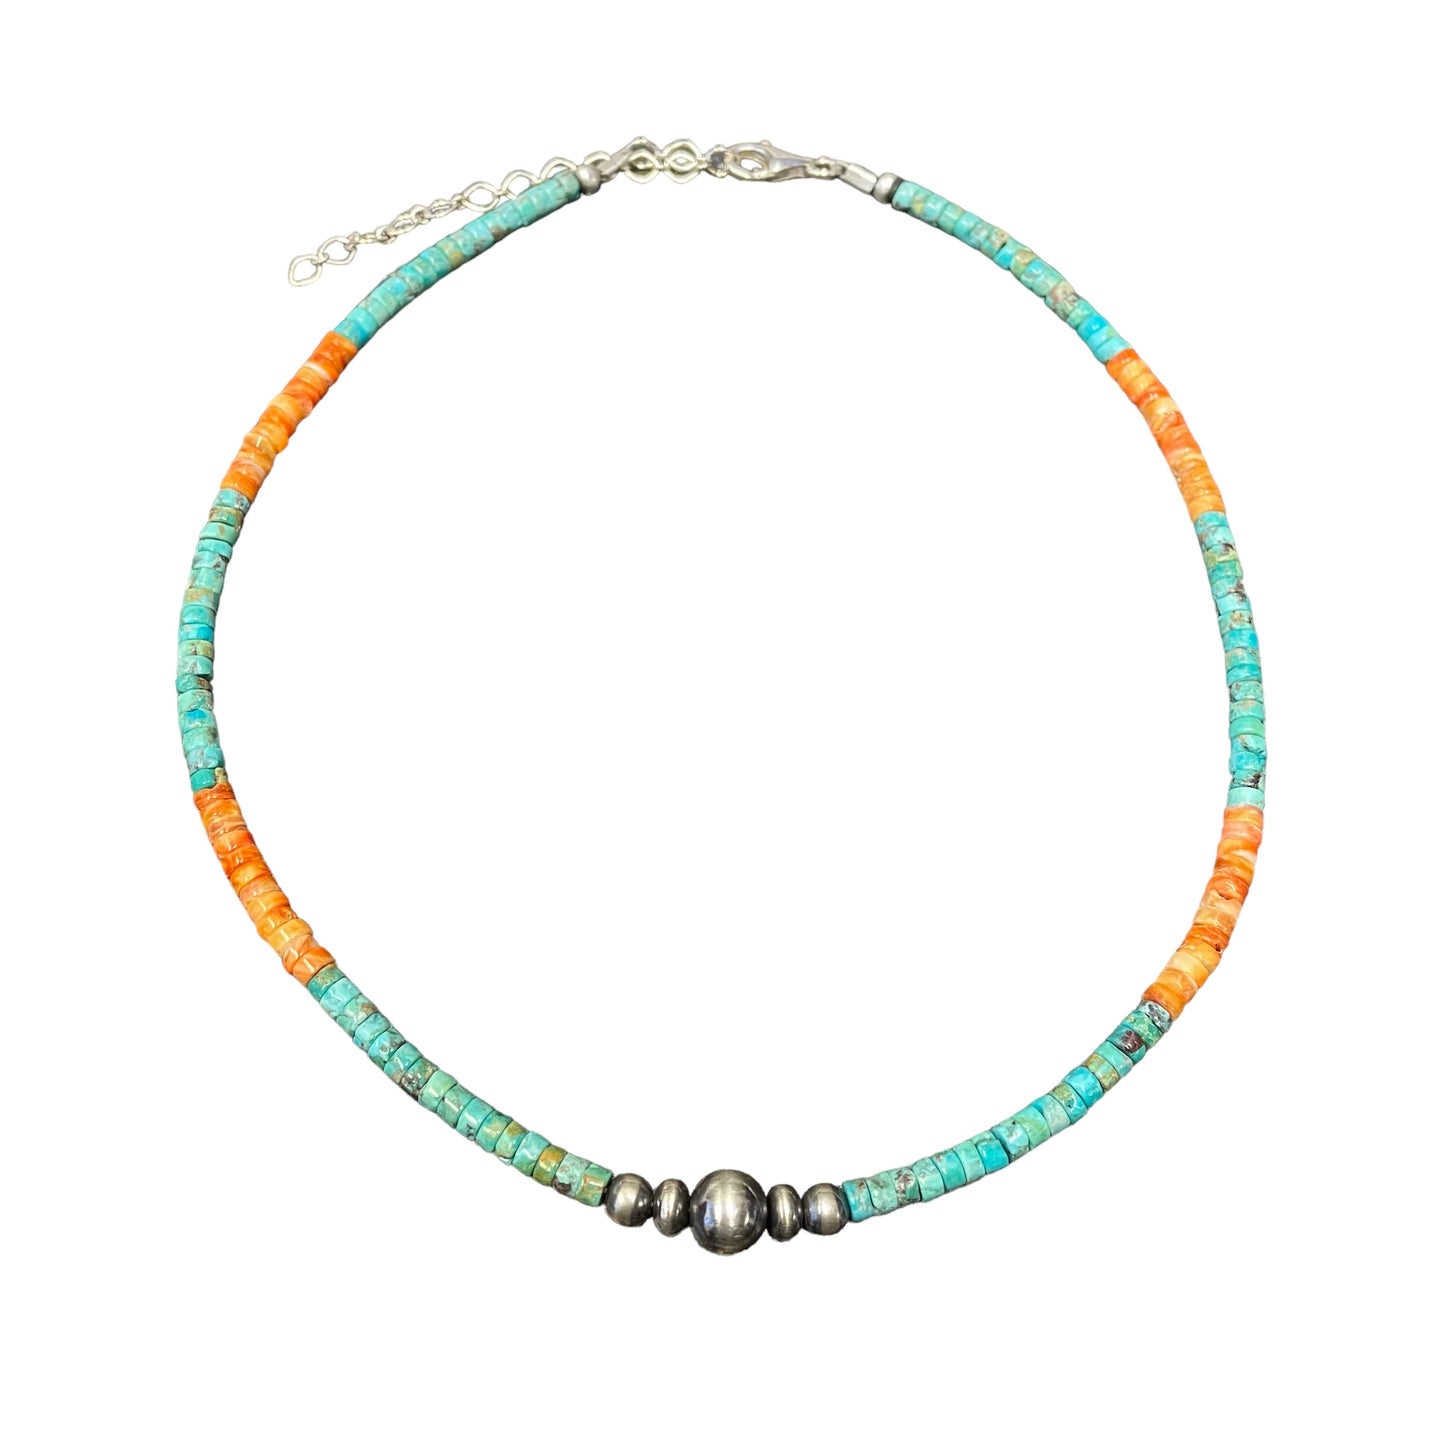 Turquoise & Spiny Oyster Desert Pearl Bead Necklace Sterling Silver